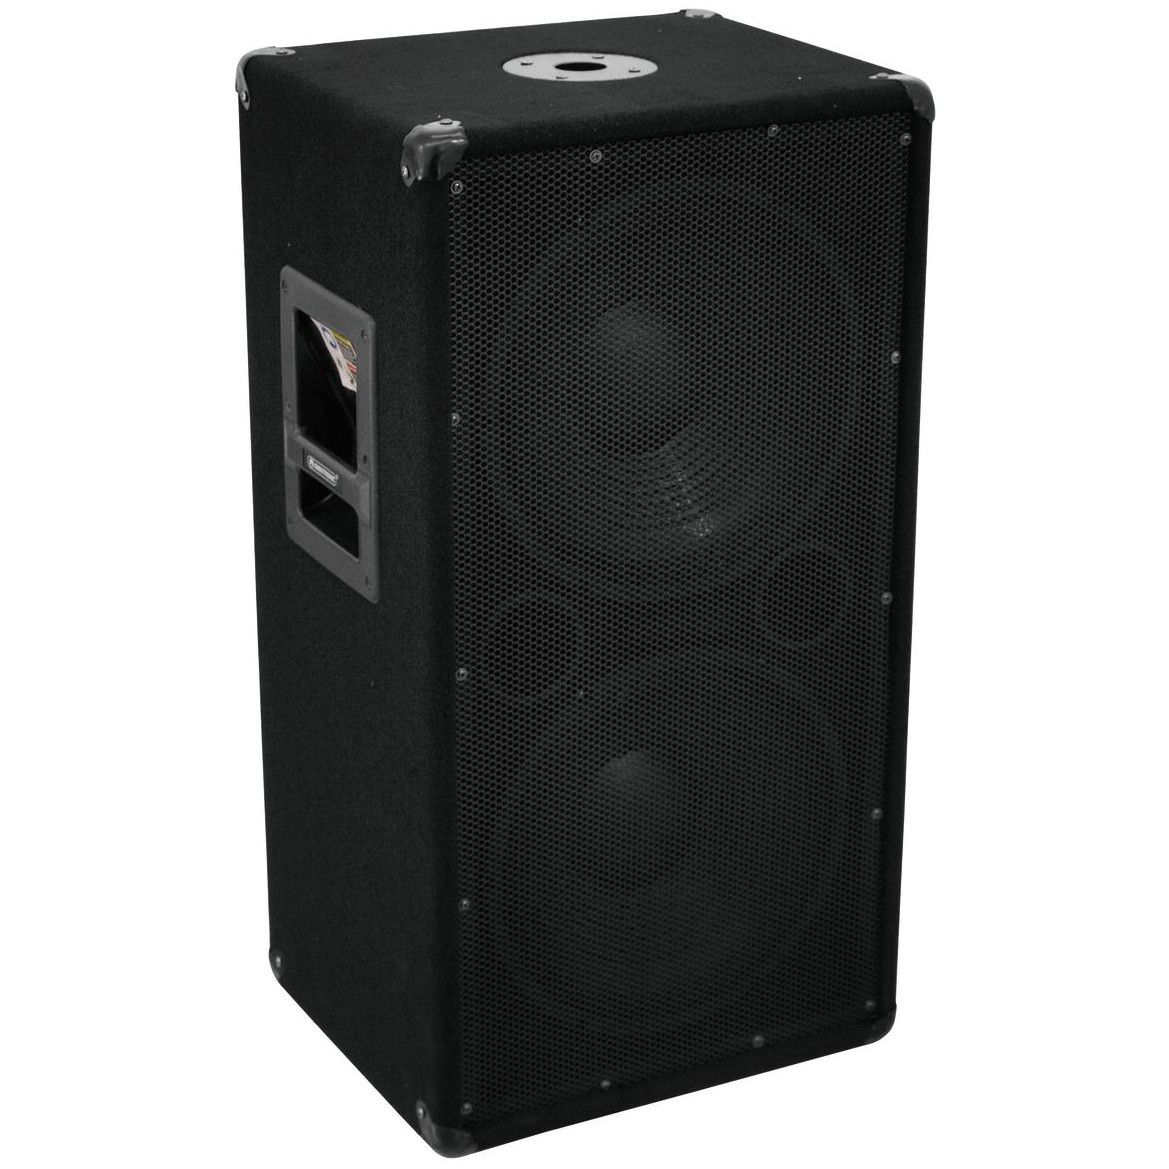 2x 12“ subwoofer 600 W RMS